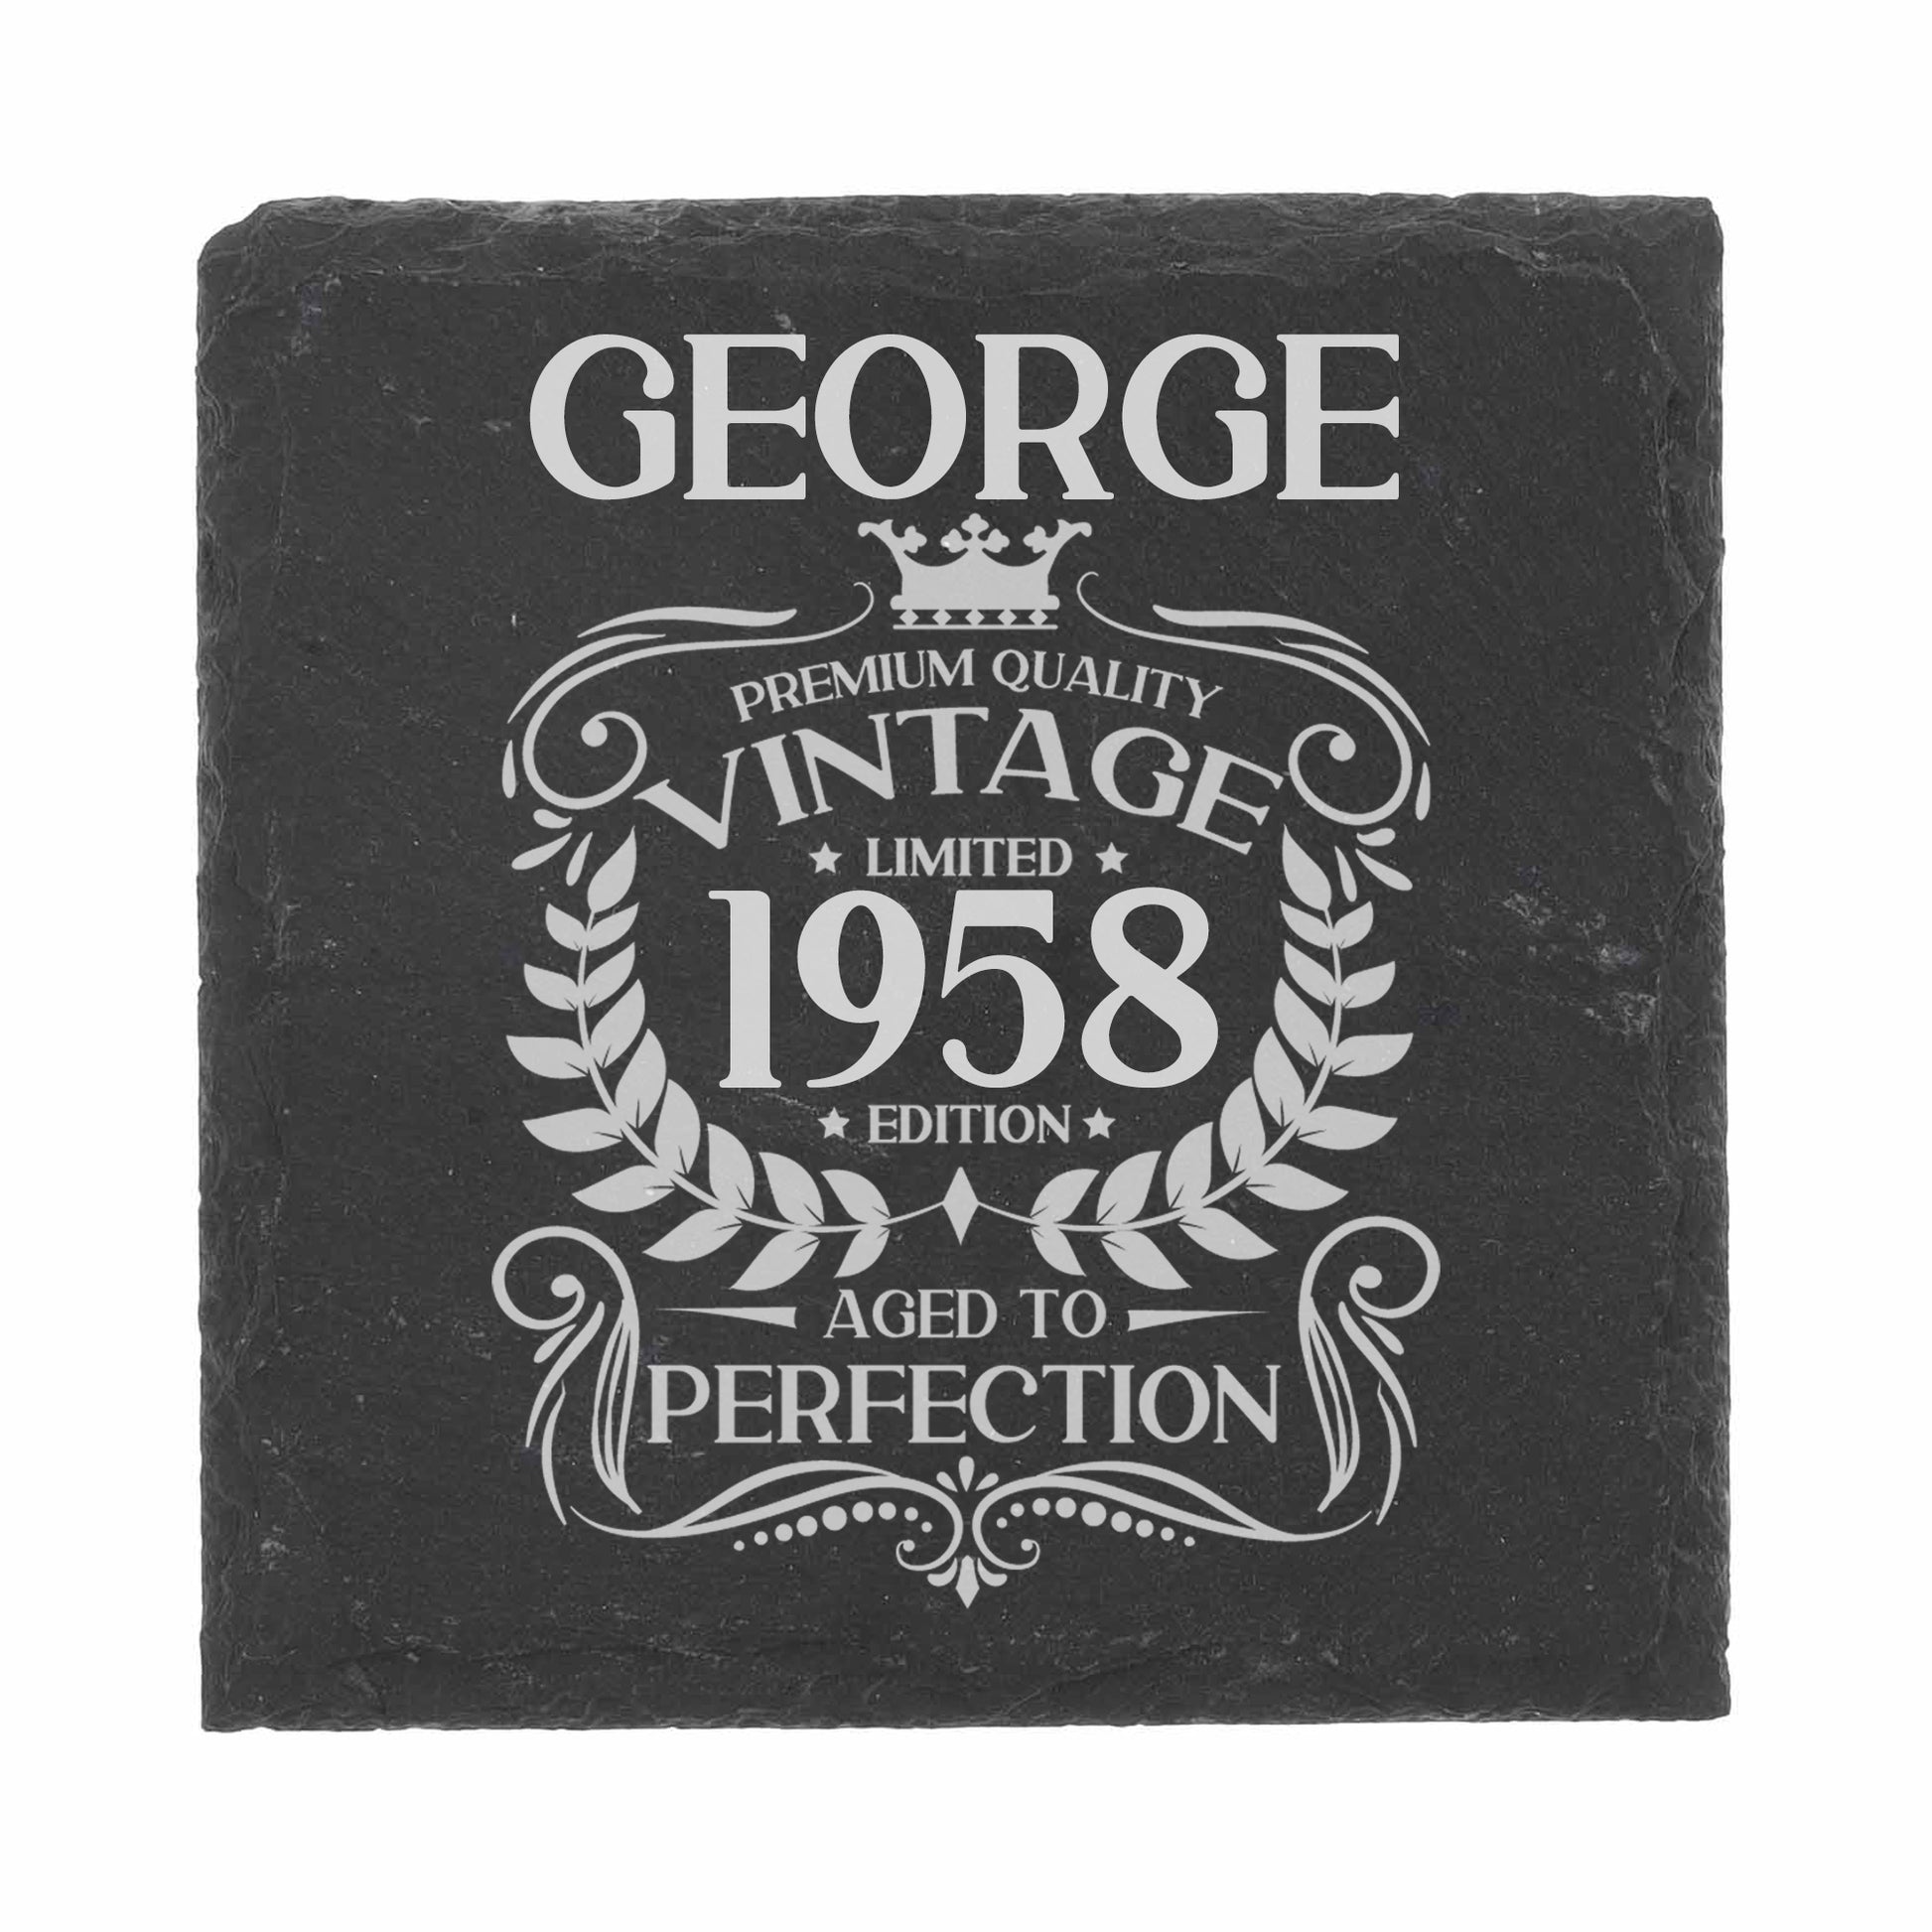 Personalised Vintage 1958 Mug and/or Coaster  - Always Looking Good - Square Coaster On Its Own  